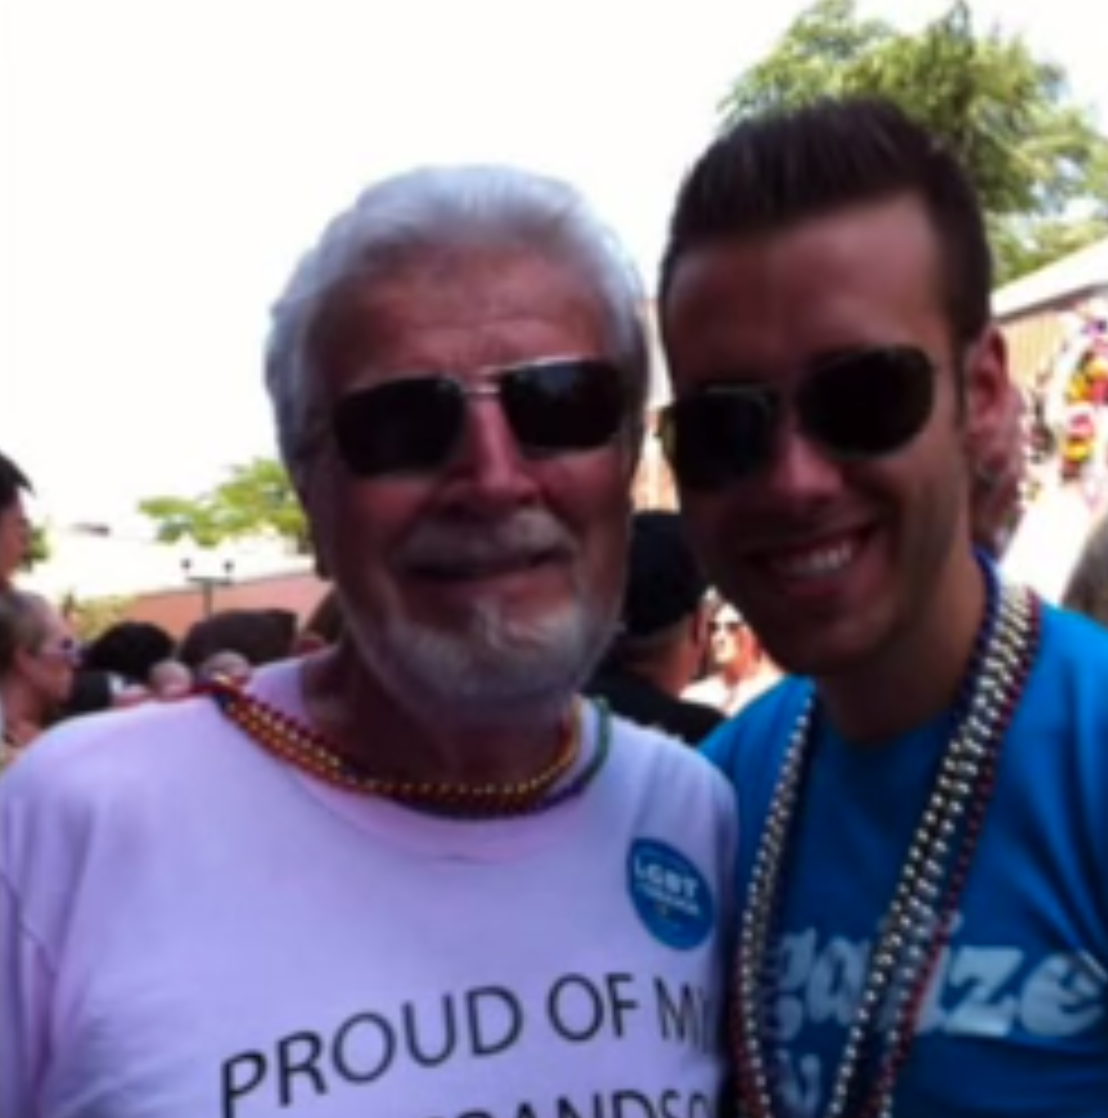 Grandfather Gets Tattoo To Support Gay Grandson Someecards Lgbt